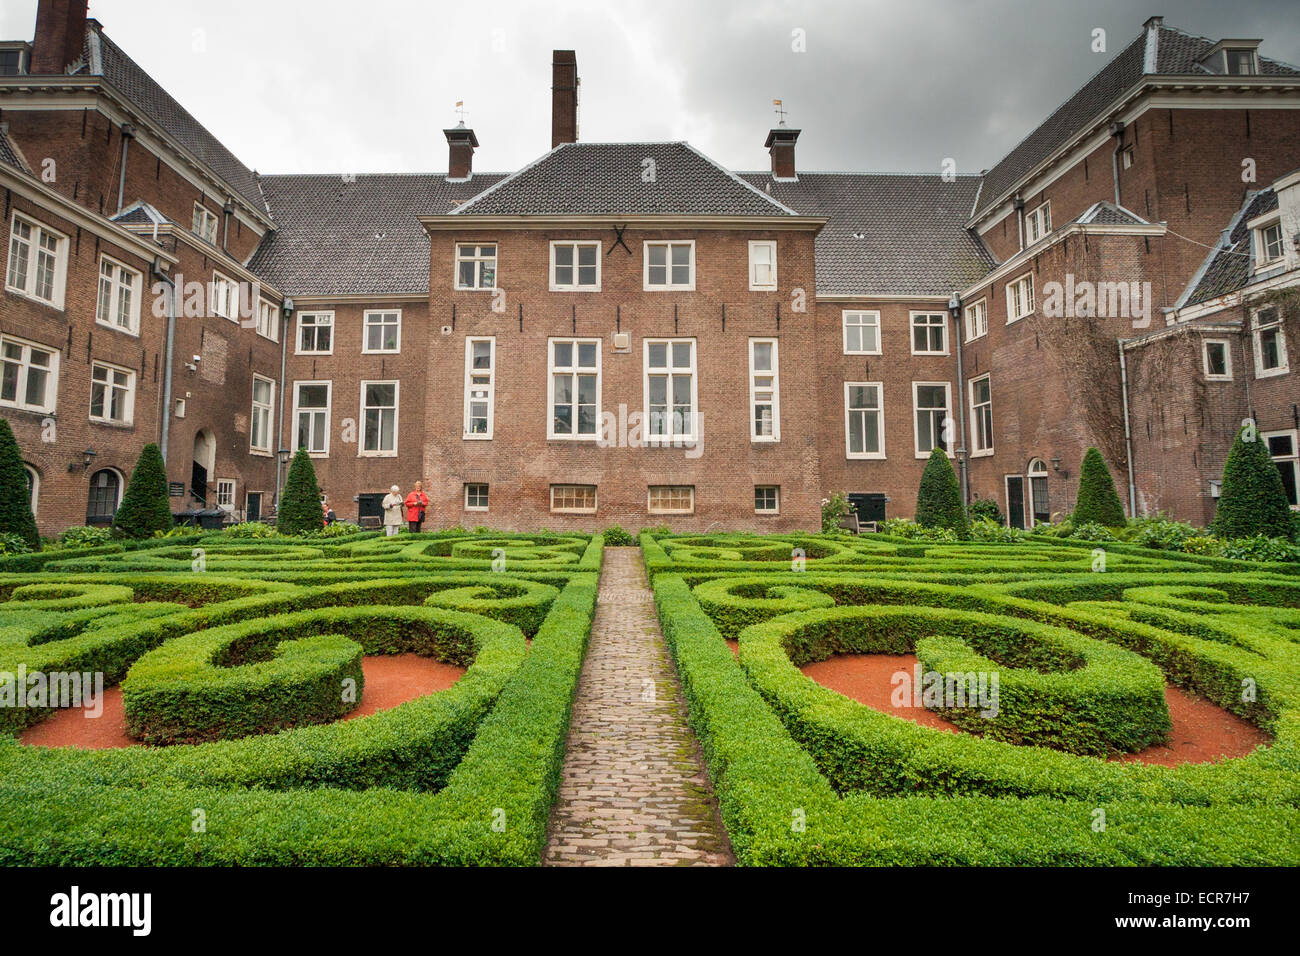 The garden of a classical canal house in amsterdam Stock Photo